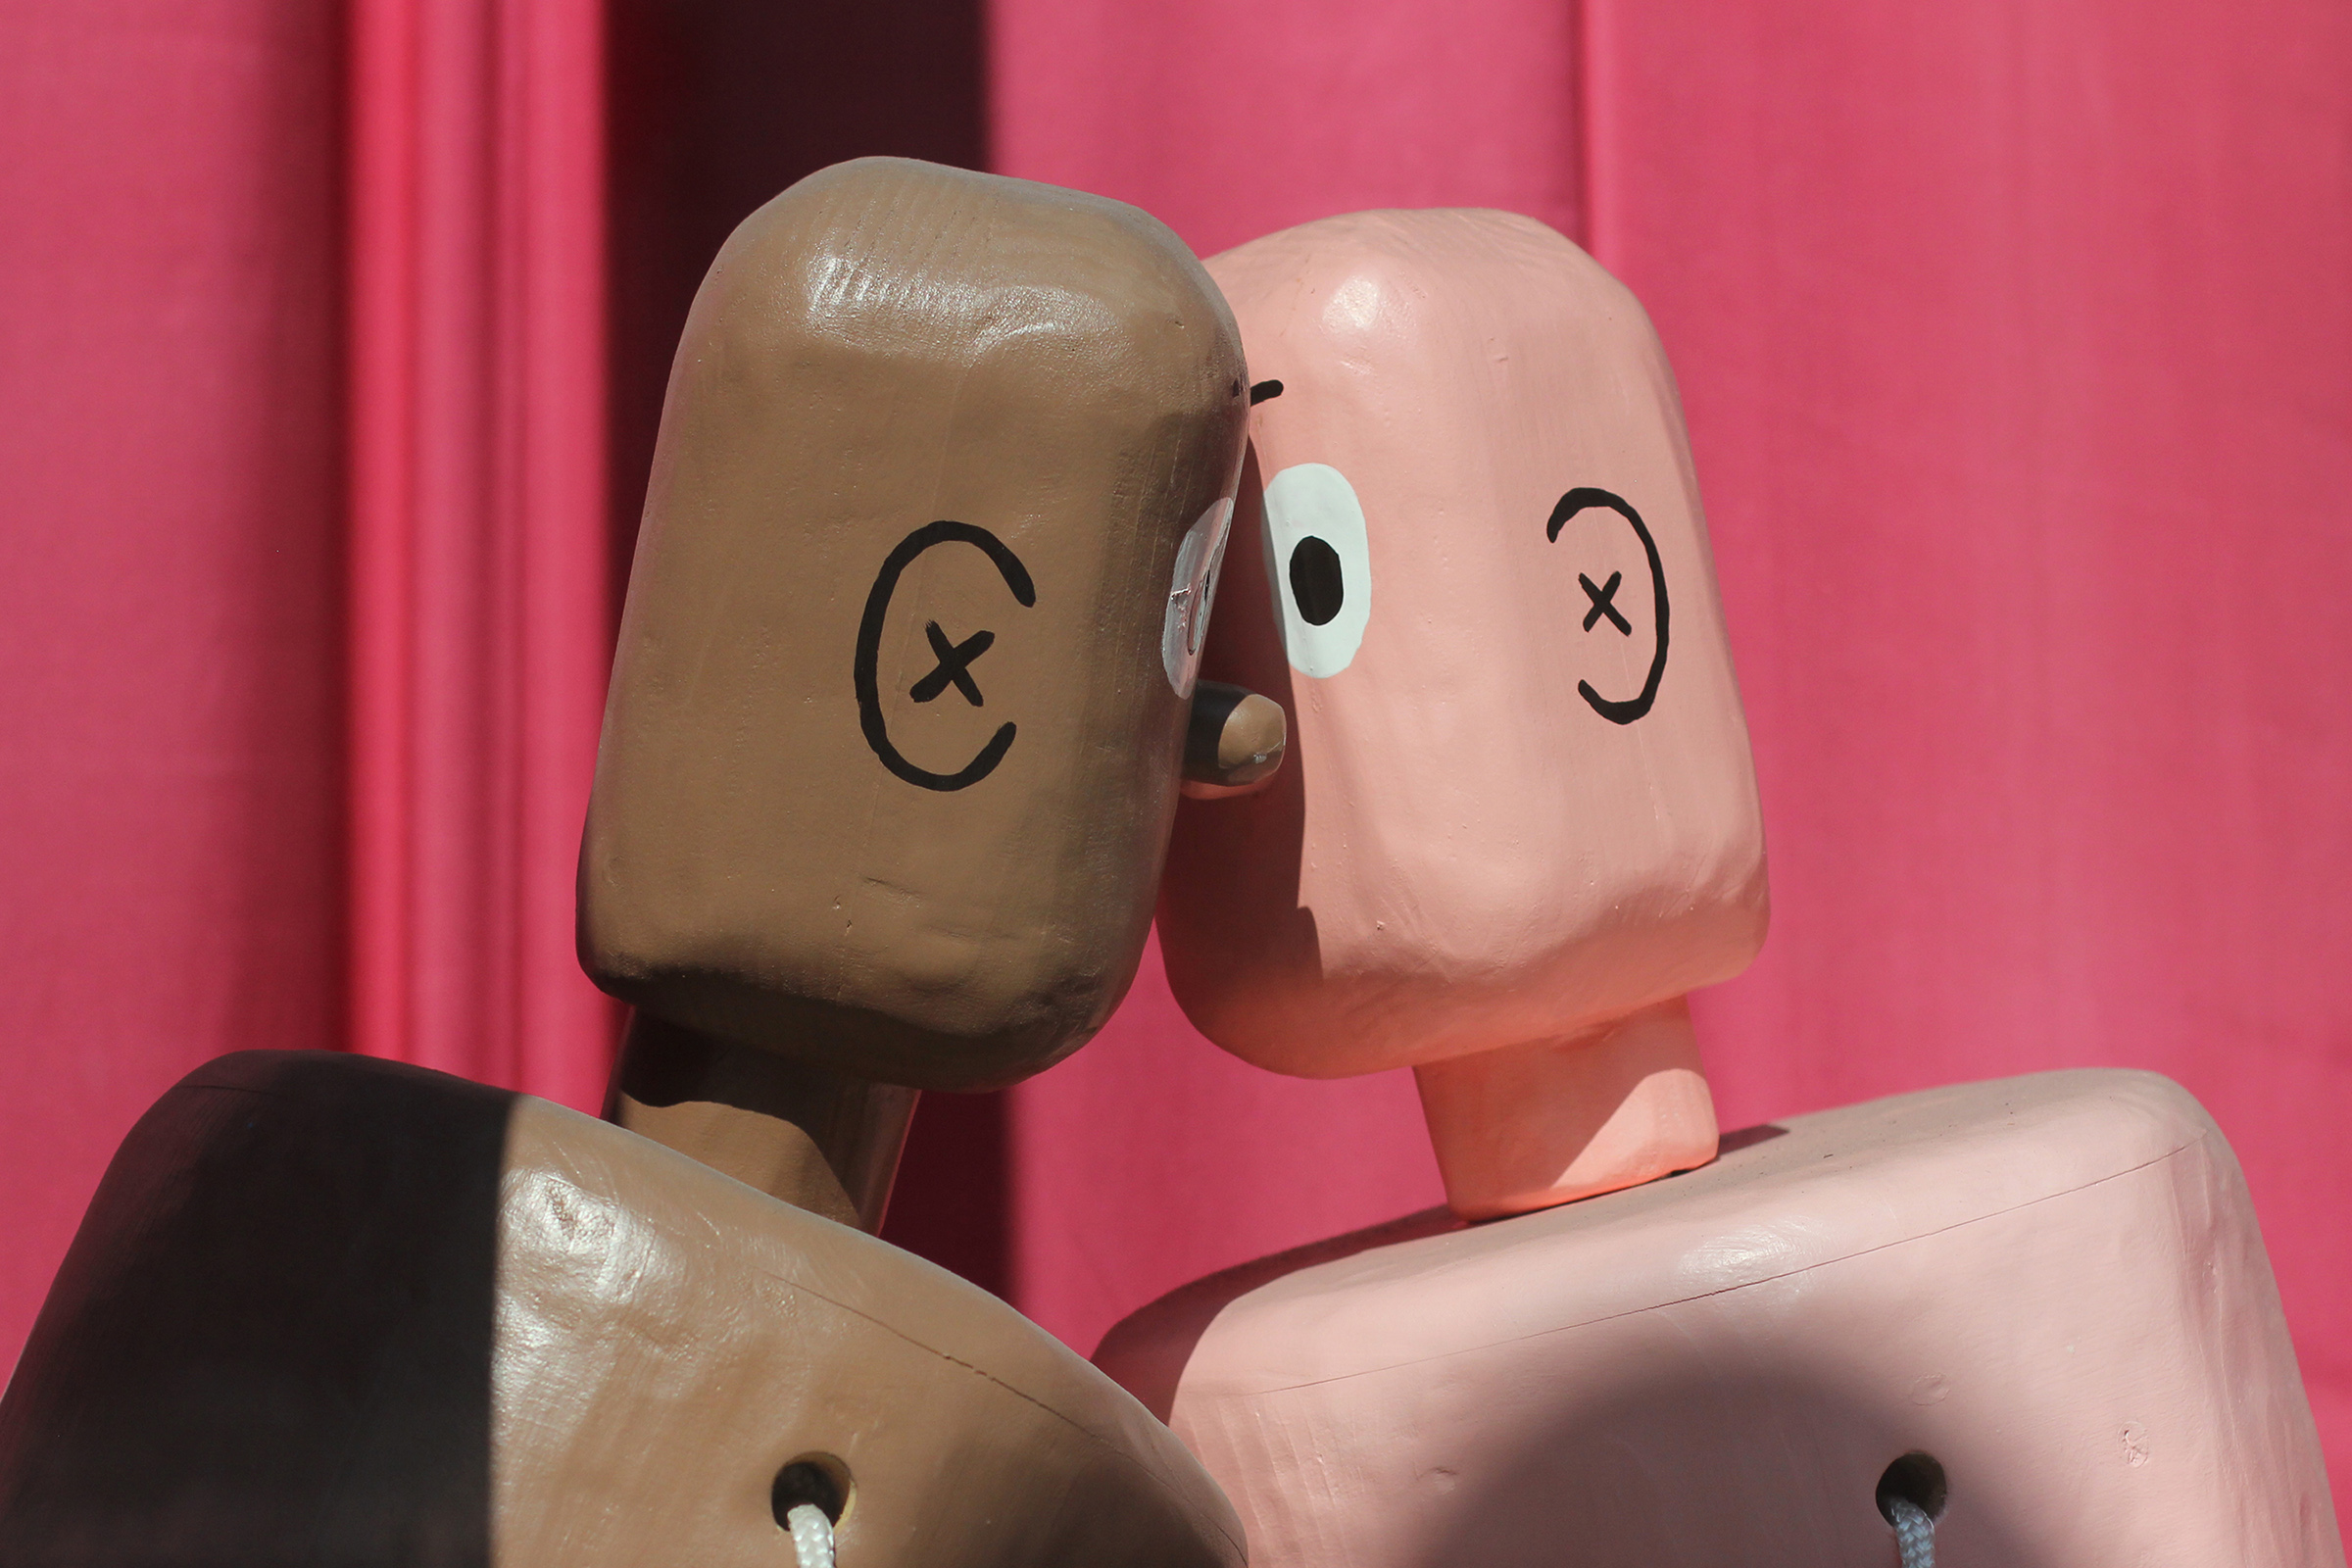 A closeup photograph of the heads and necks of two life-size, wooden sculptures painted to look like boxers that are leaning into each other. The figures resemble push puppet toys.